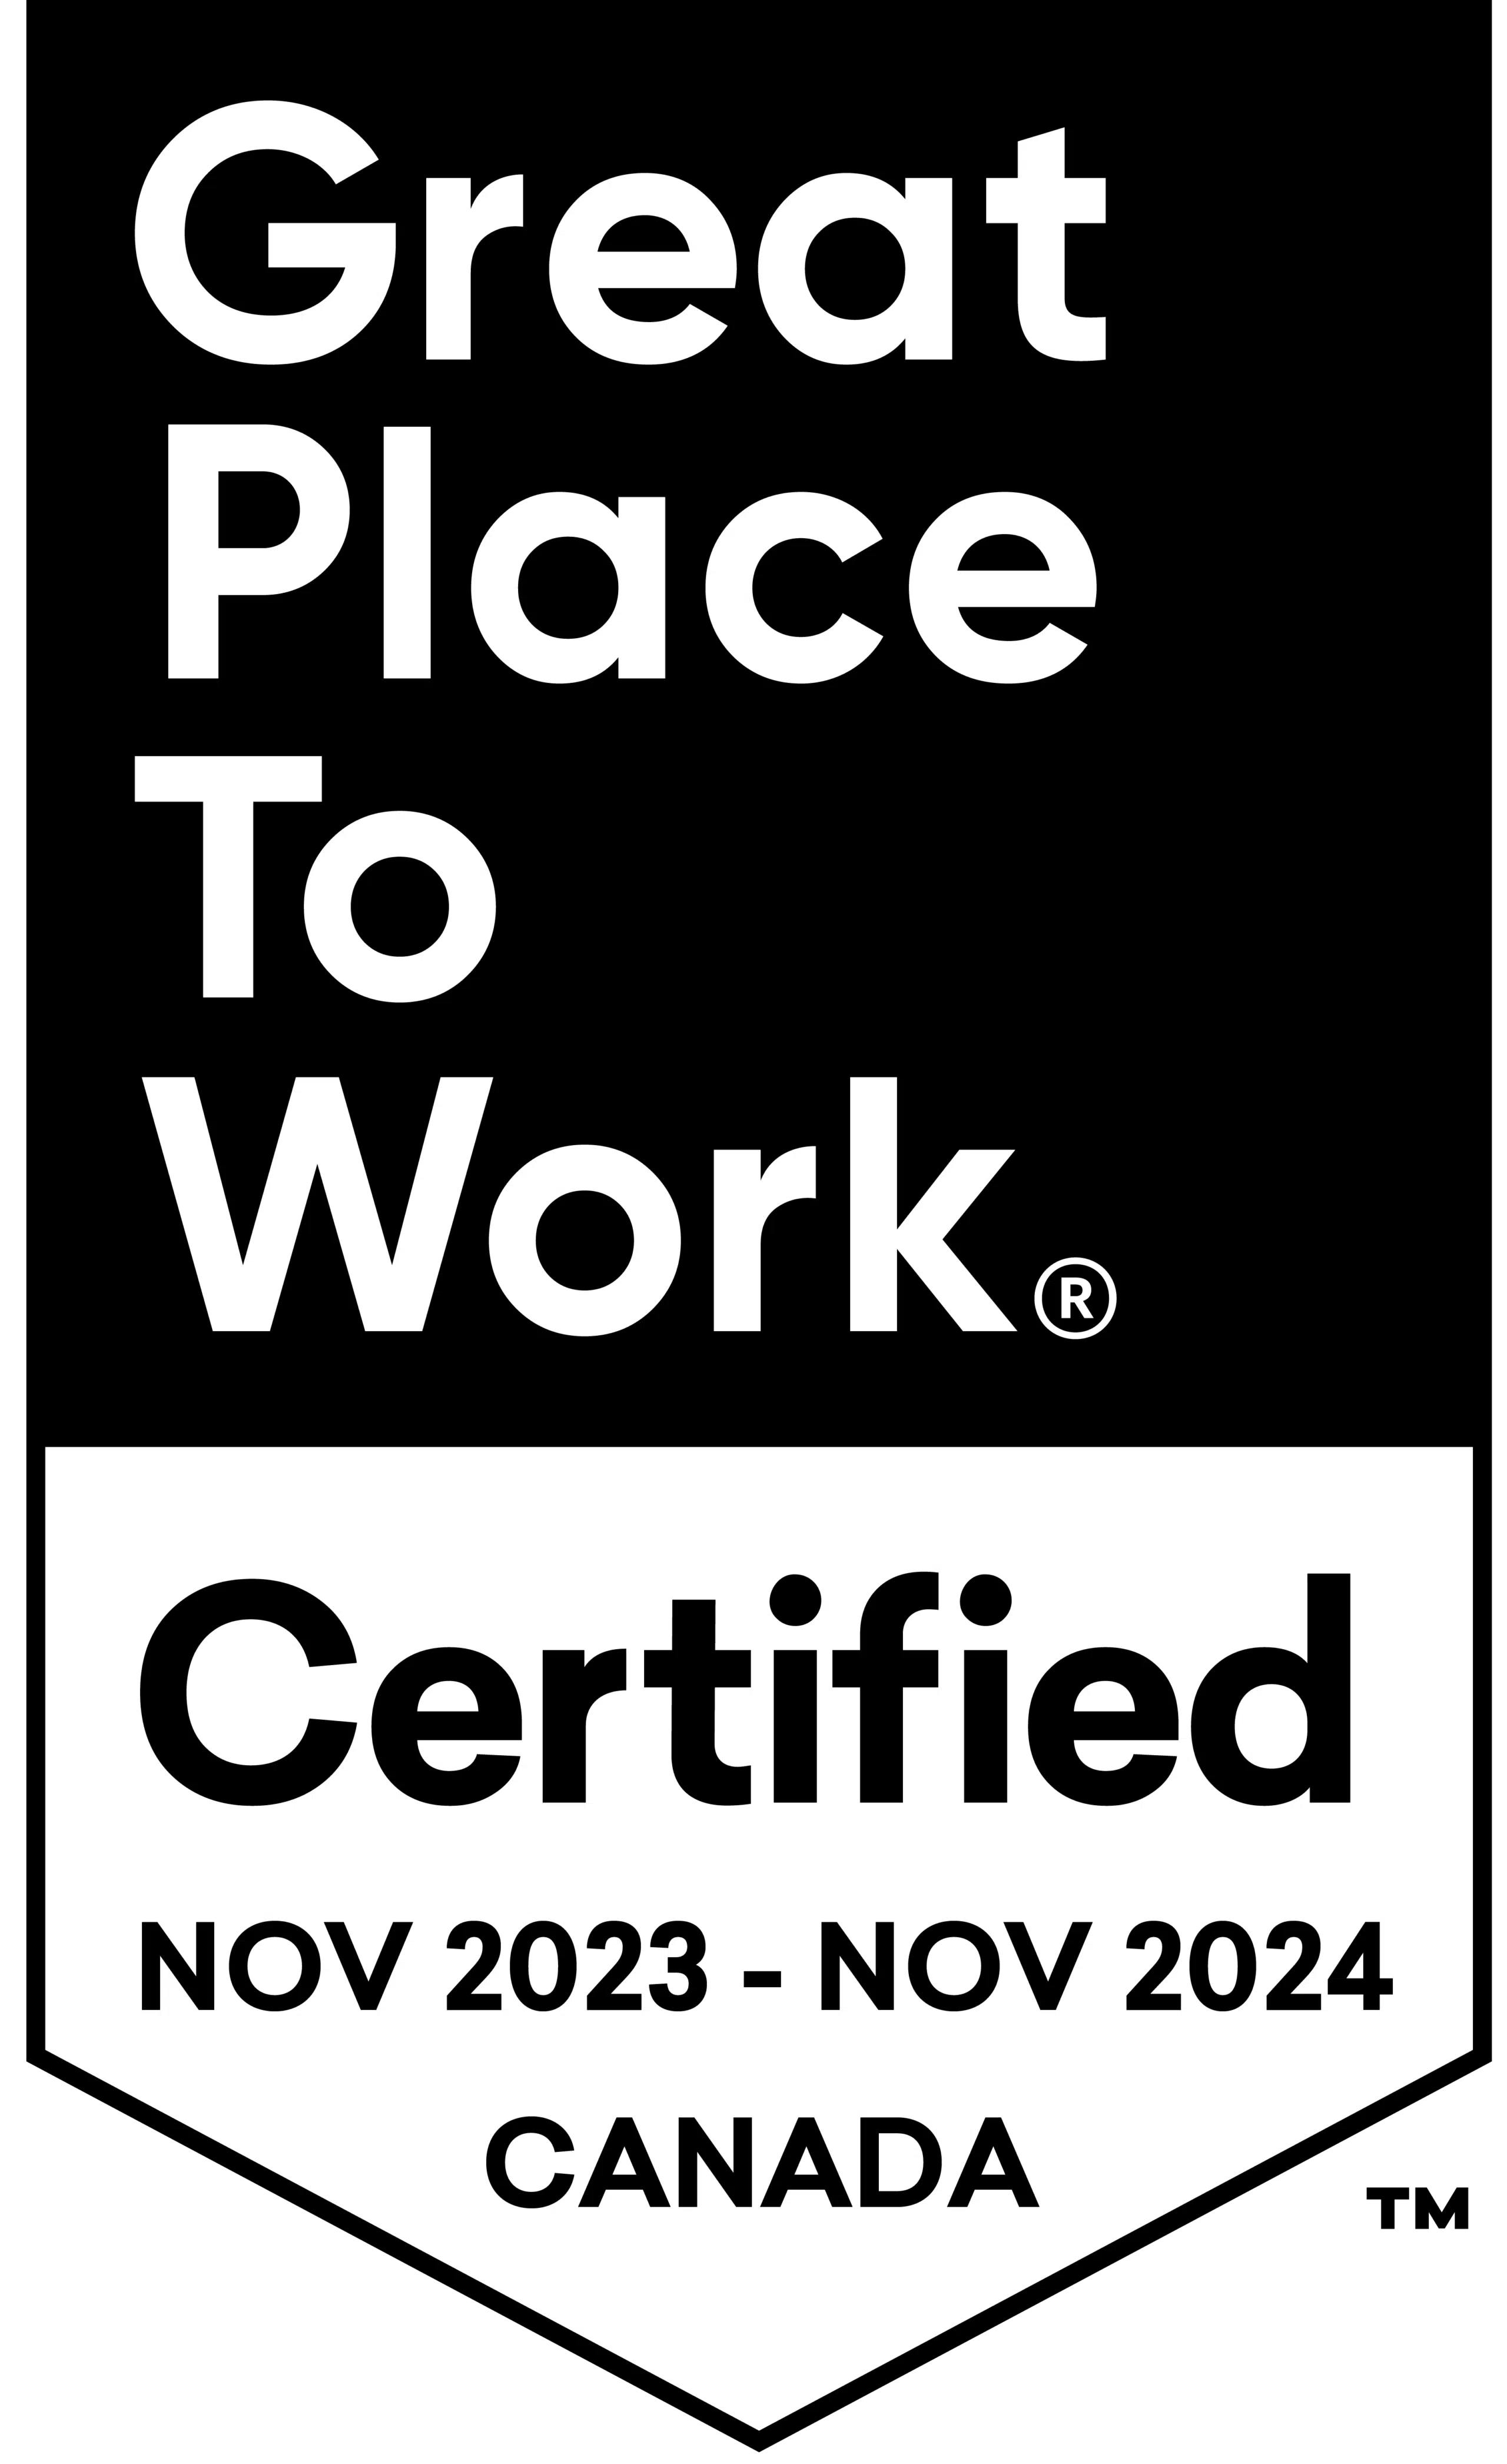 Great Place to Work- Certification Logo 2023